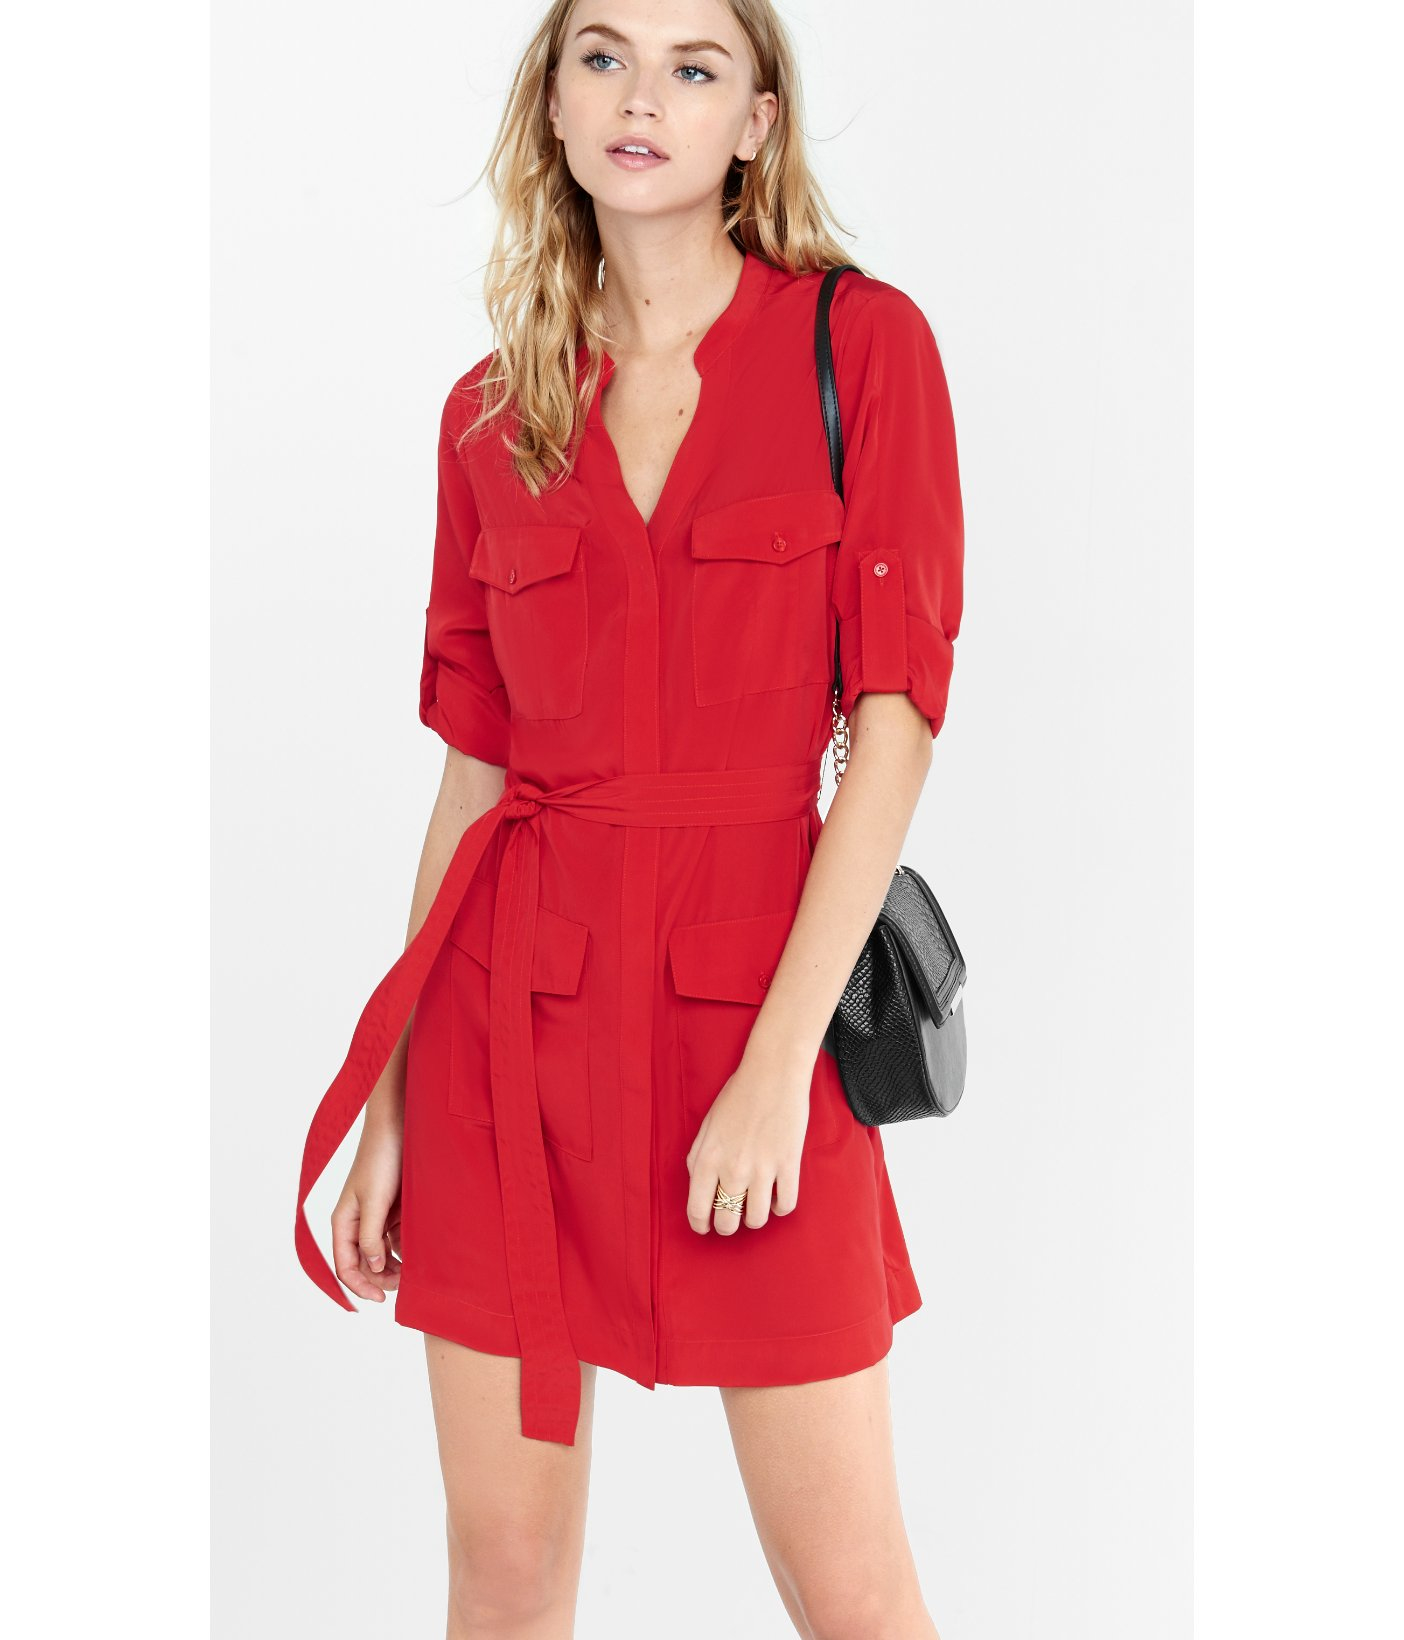 Lyst - Express Red Four Pocket Military Shirt Dress in Red